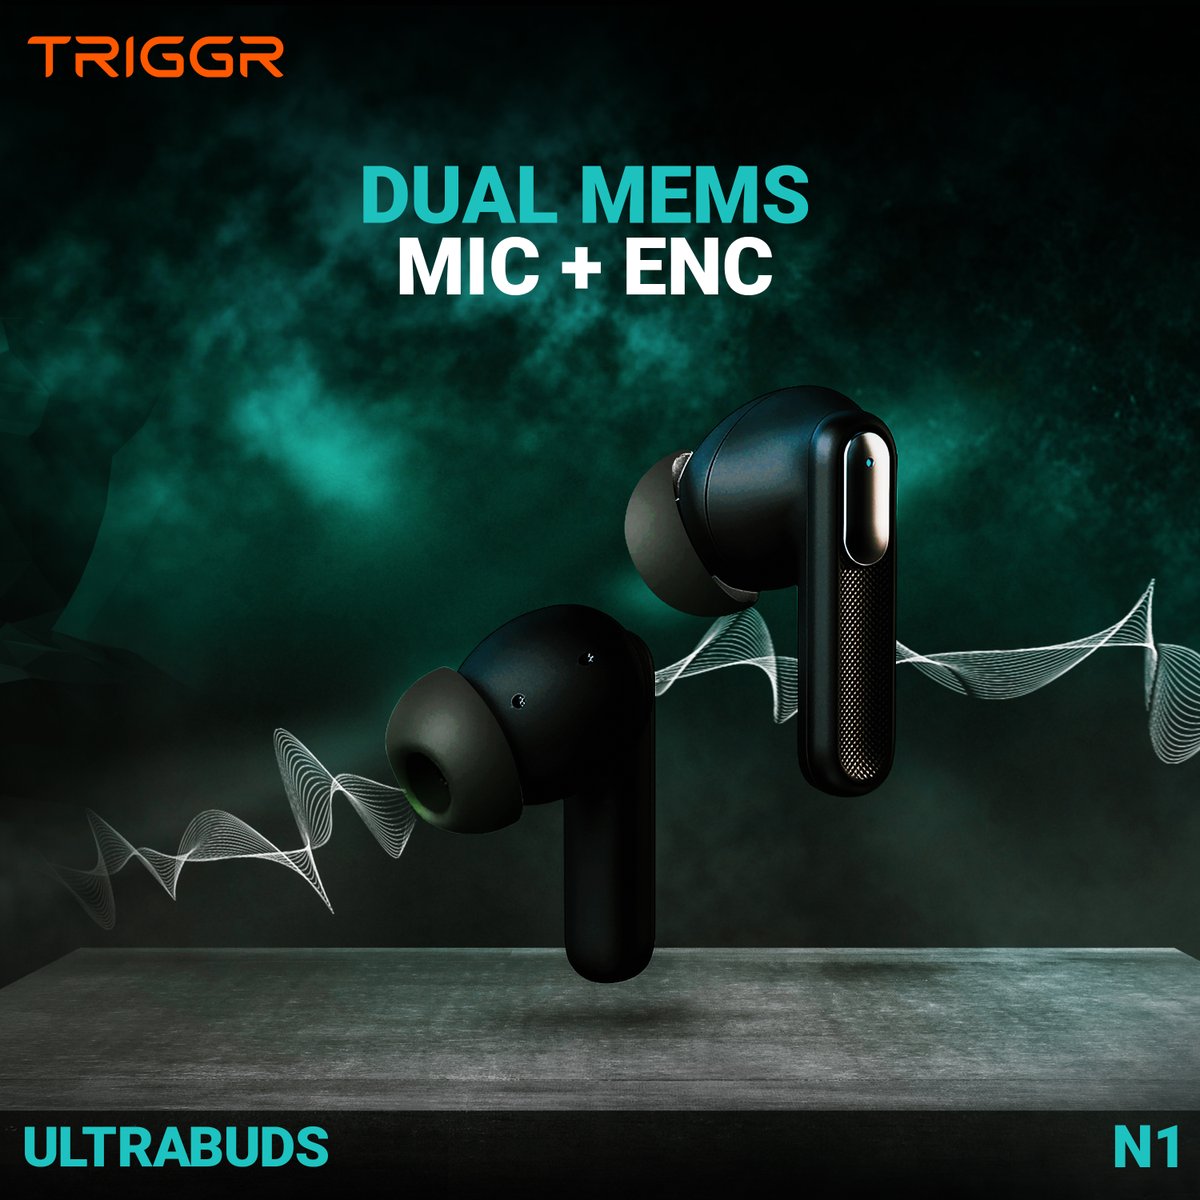 Unleash the power of Dual MEMS Mic & ENC for superior voice quality and clarity with TRIGGR Ultrabuds N1. Your calls, your way – order your pair today and experience the difference. 💬🎶👂 

Buy Now: shorturl.at/ackY9

#TRIGGR #UltrabudsN1 #MEMSMic #ENC  #CrystalClearCalls